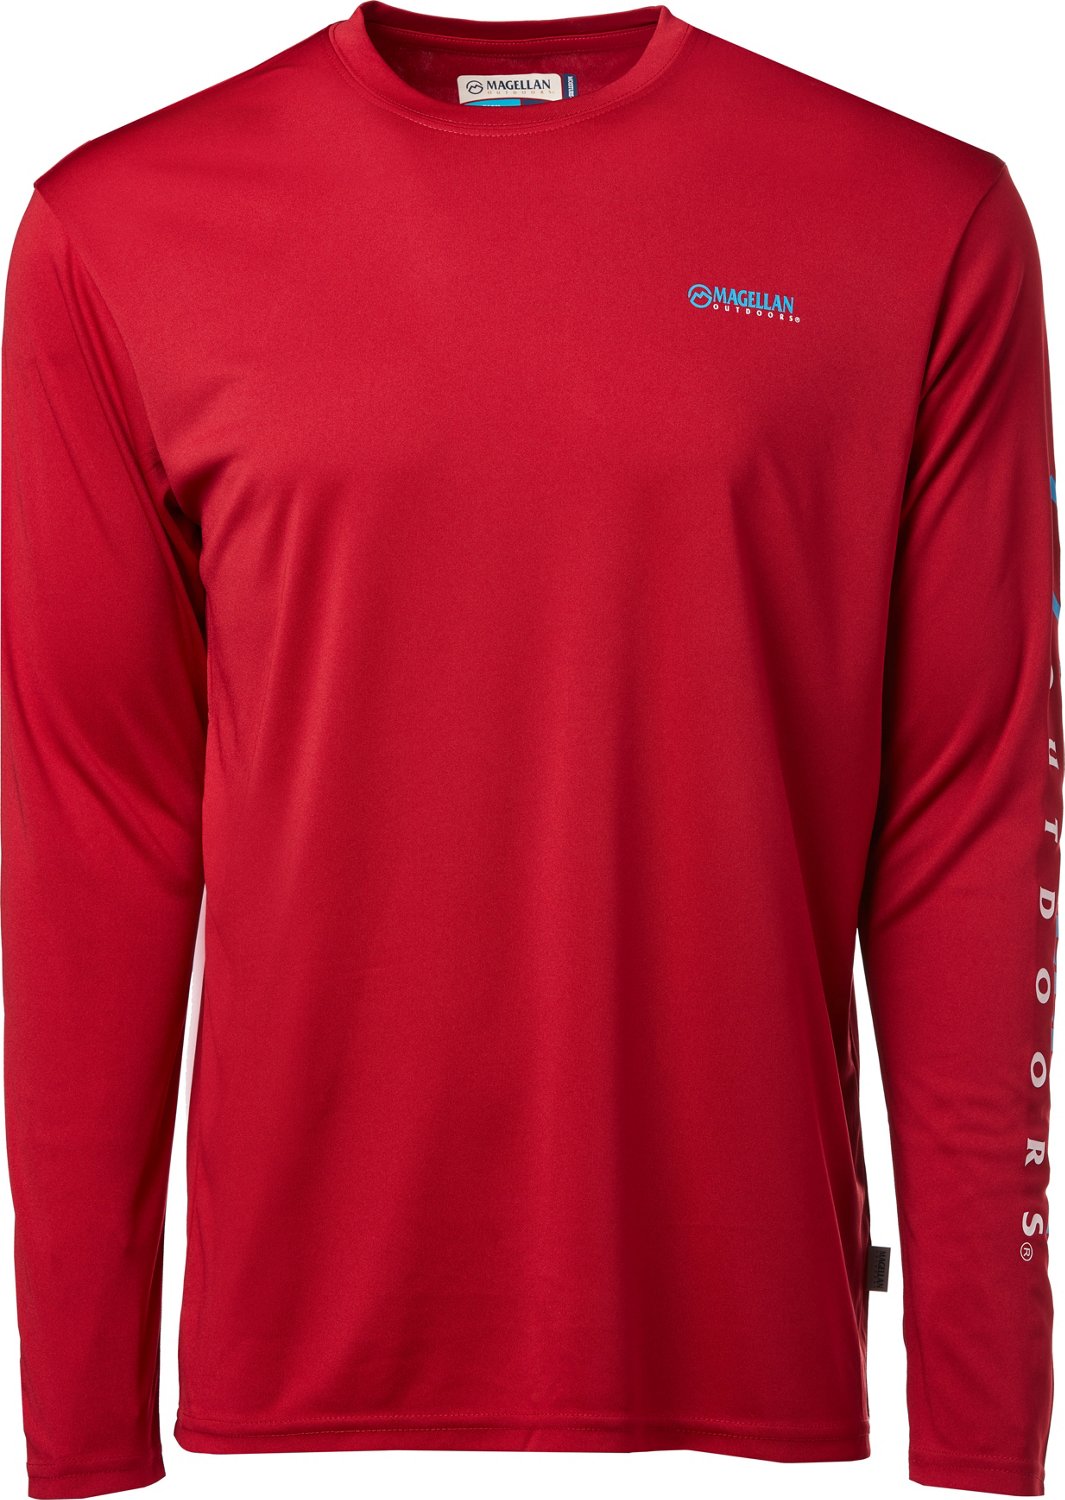 Magellan Long Sleeve Red Shirts for Men for sale